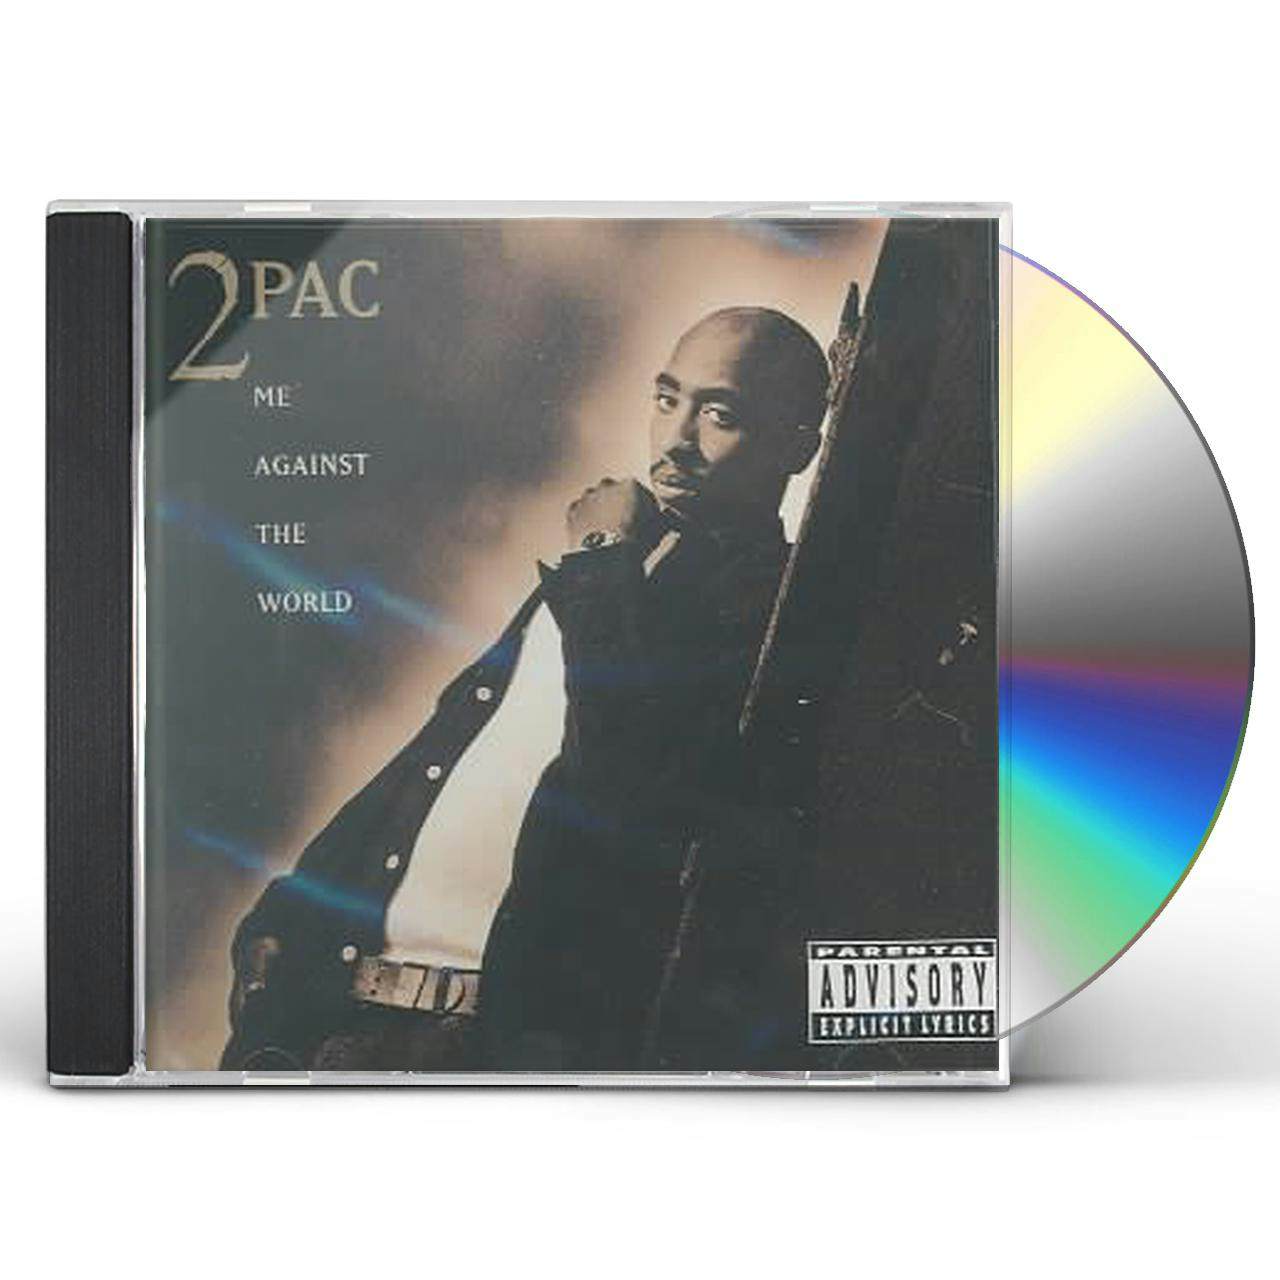 2pac me against the world album cover